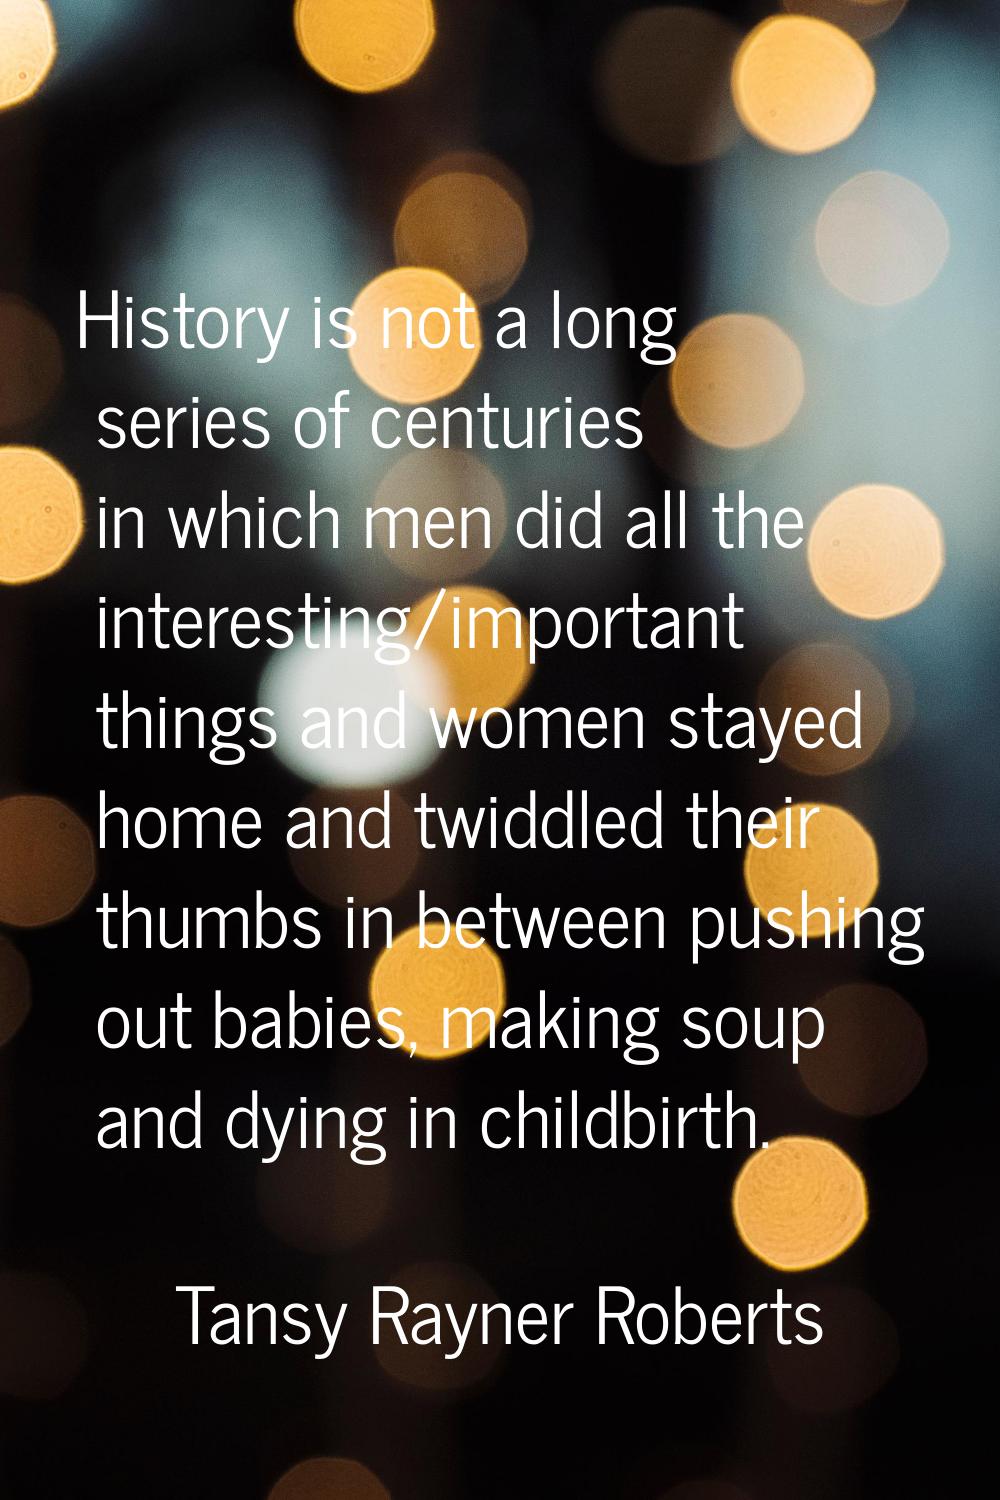 History is not a long series of centuries in which men did all the interesting/important things and